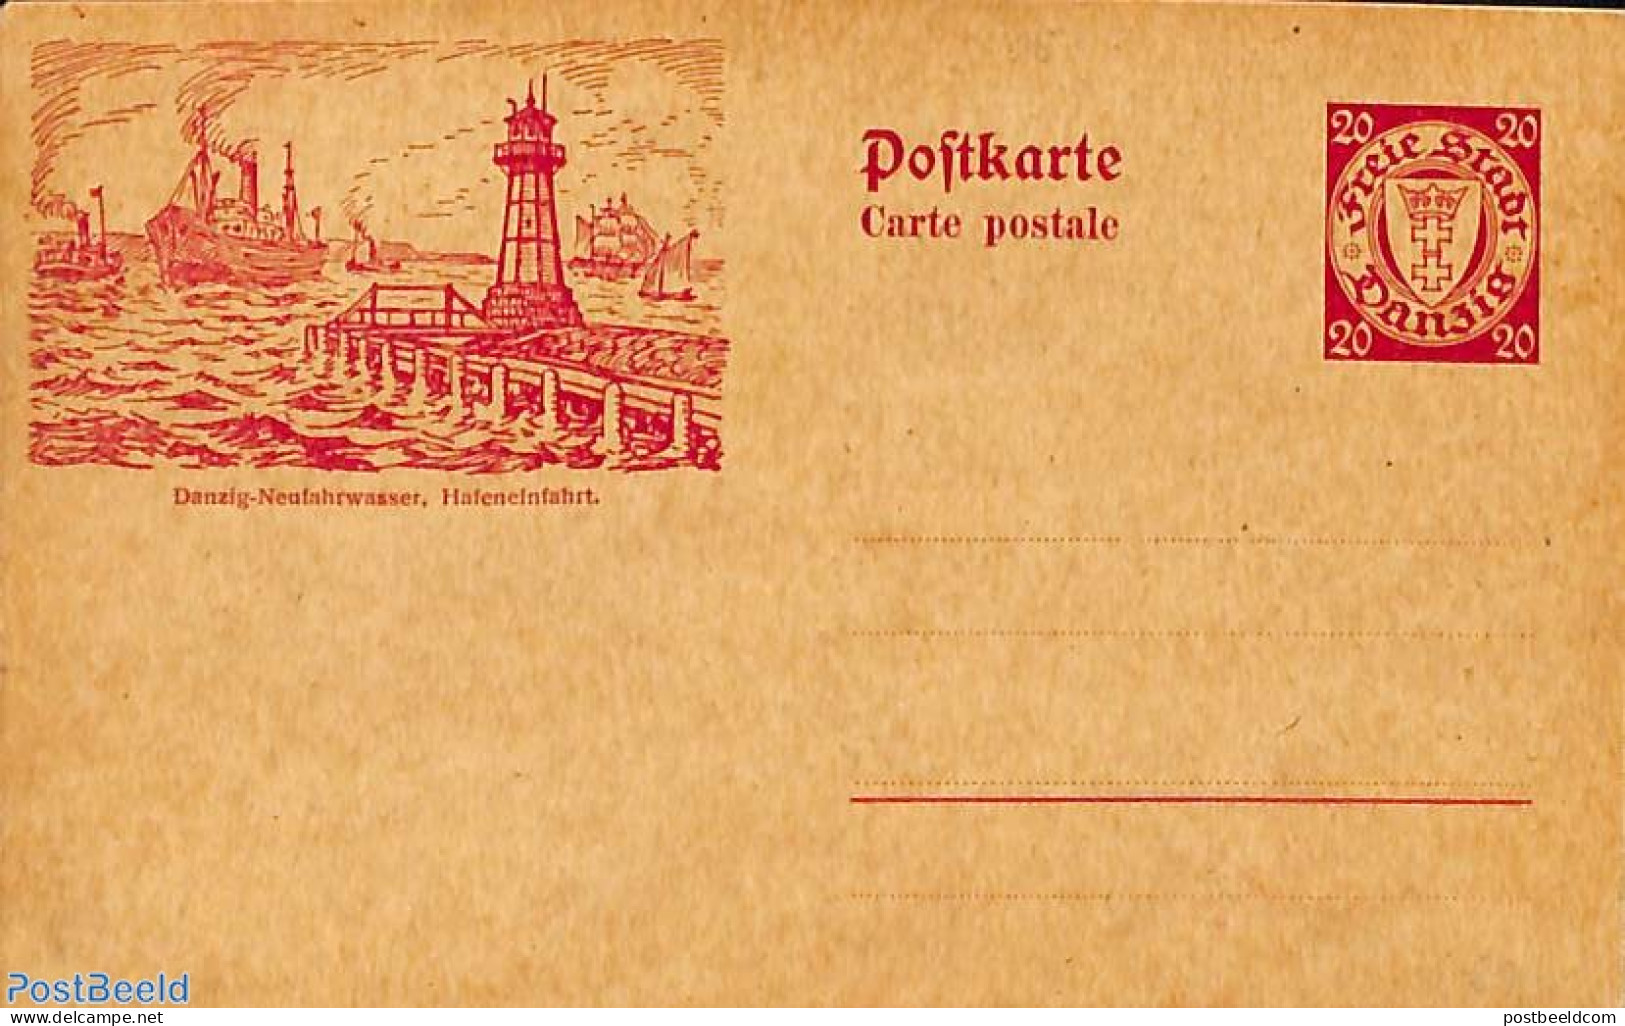 Germany, Danzig 1925 Illustrated Postcard 20pf, Unused Postal Stationary, Transport - Various - Ships And Boats - Ligh.. - Schiffe